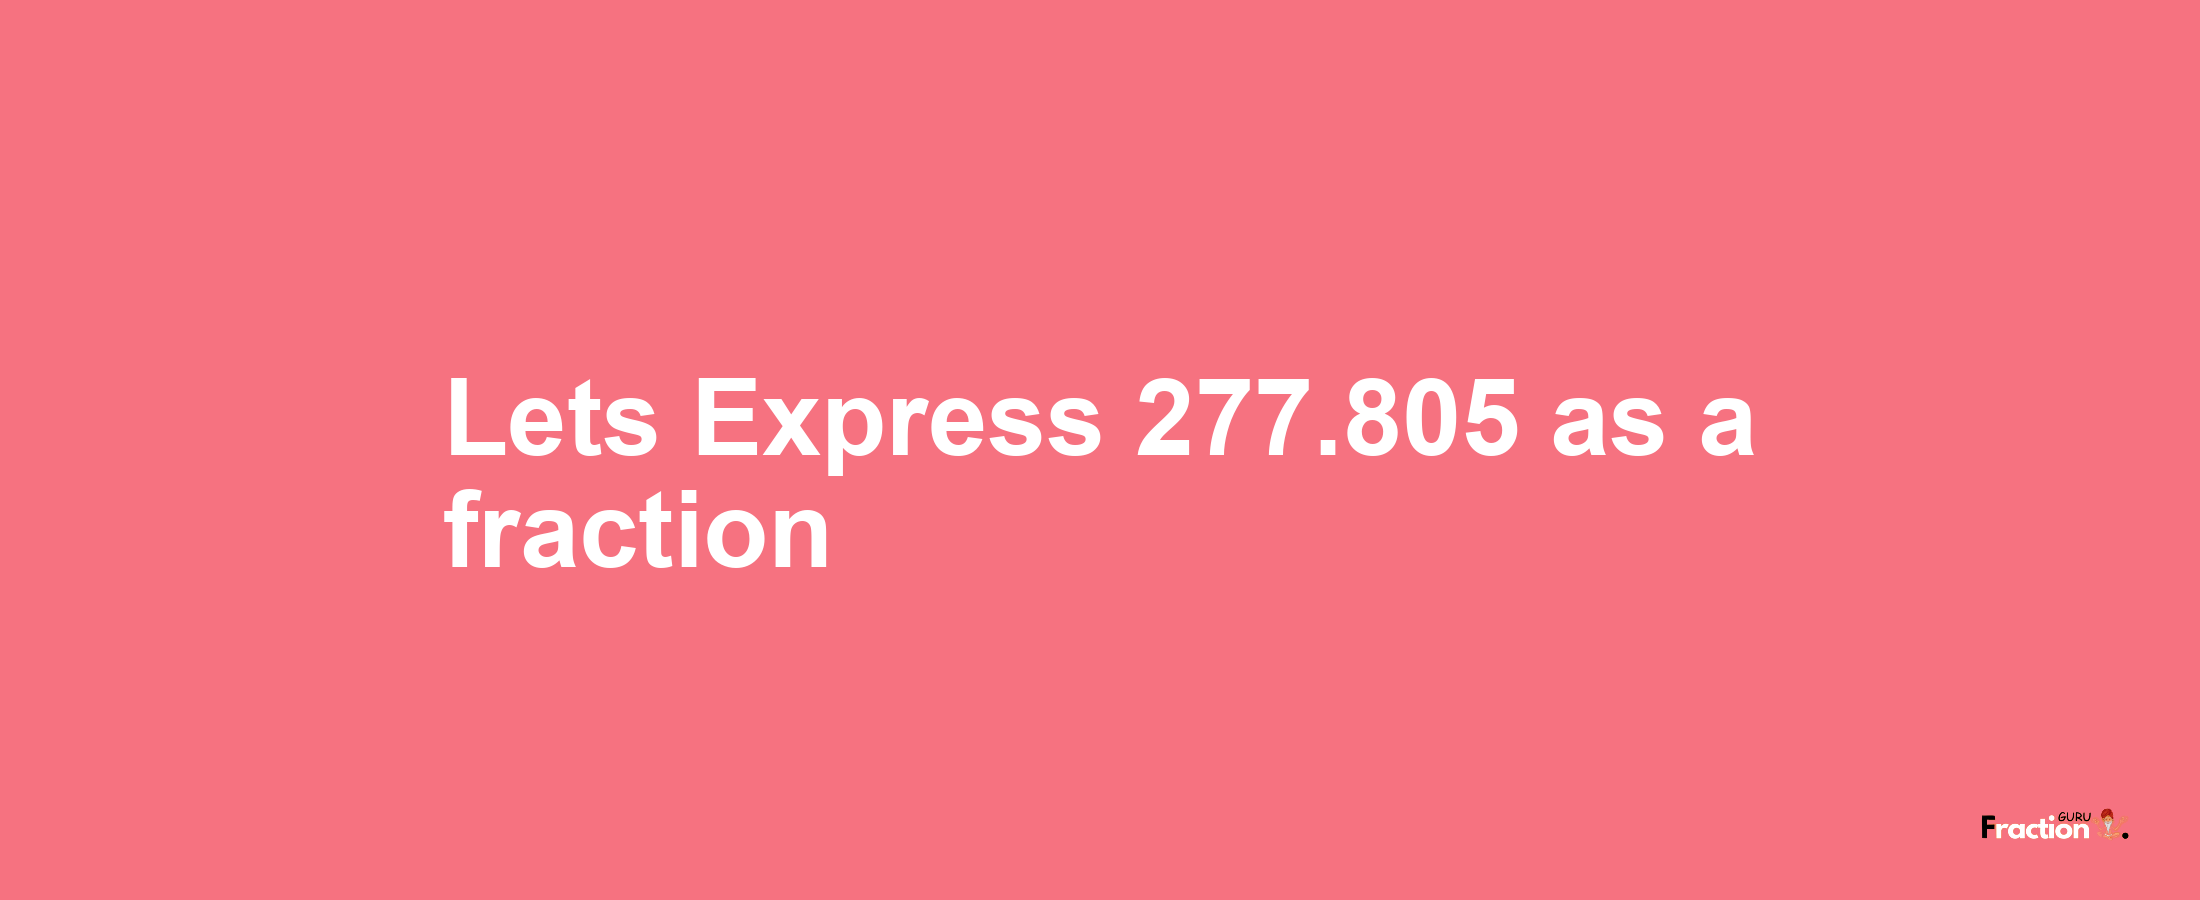 Lets Express 277.805 as afraction